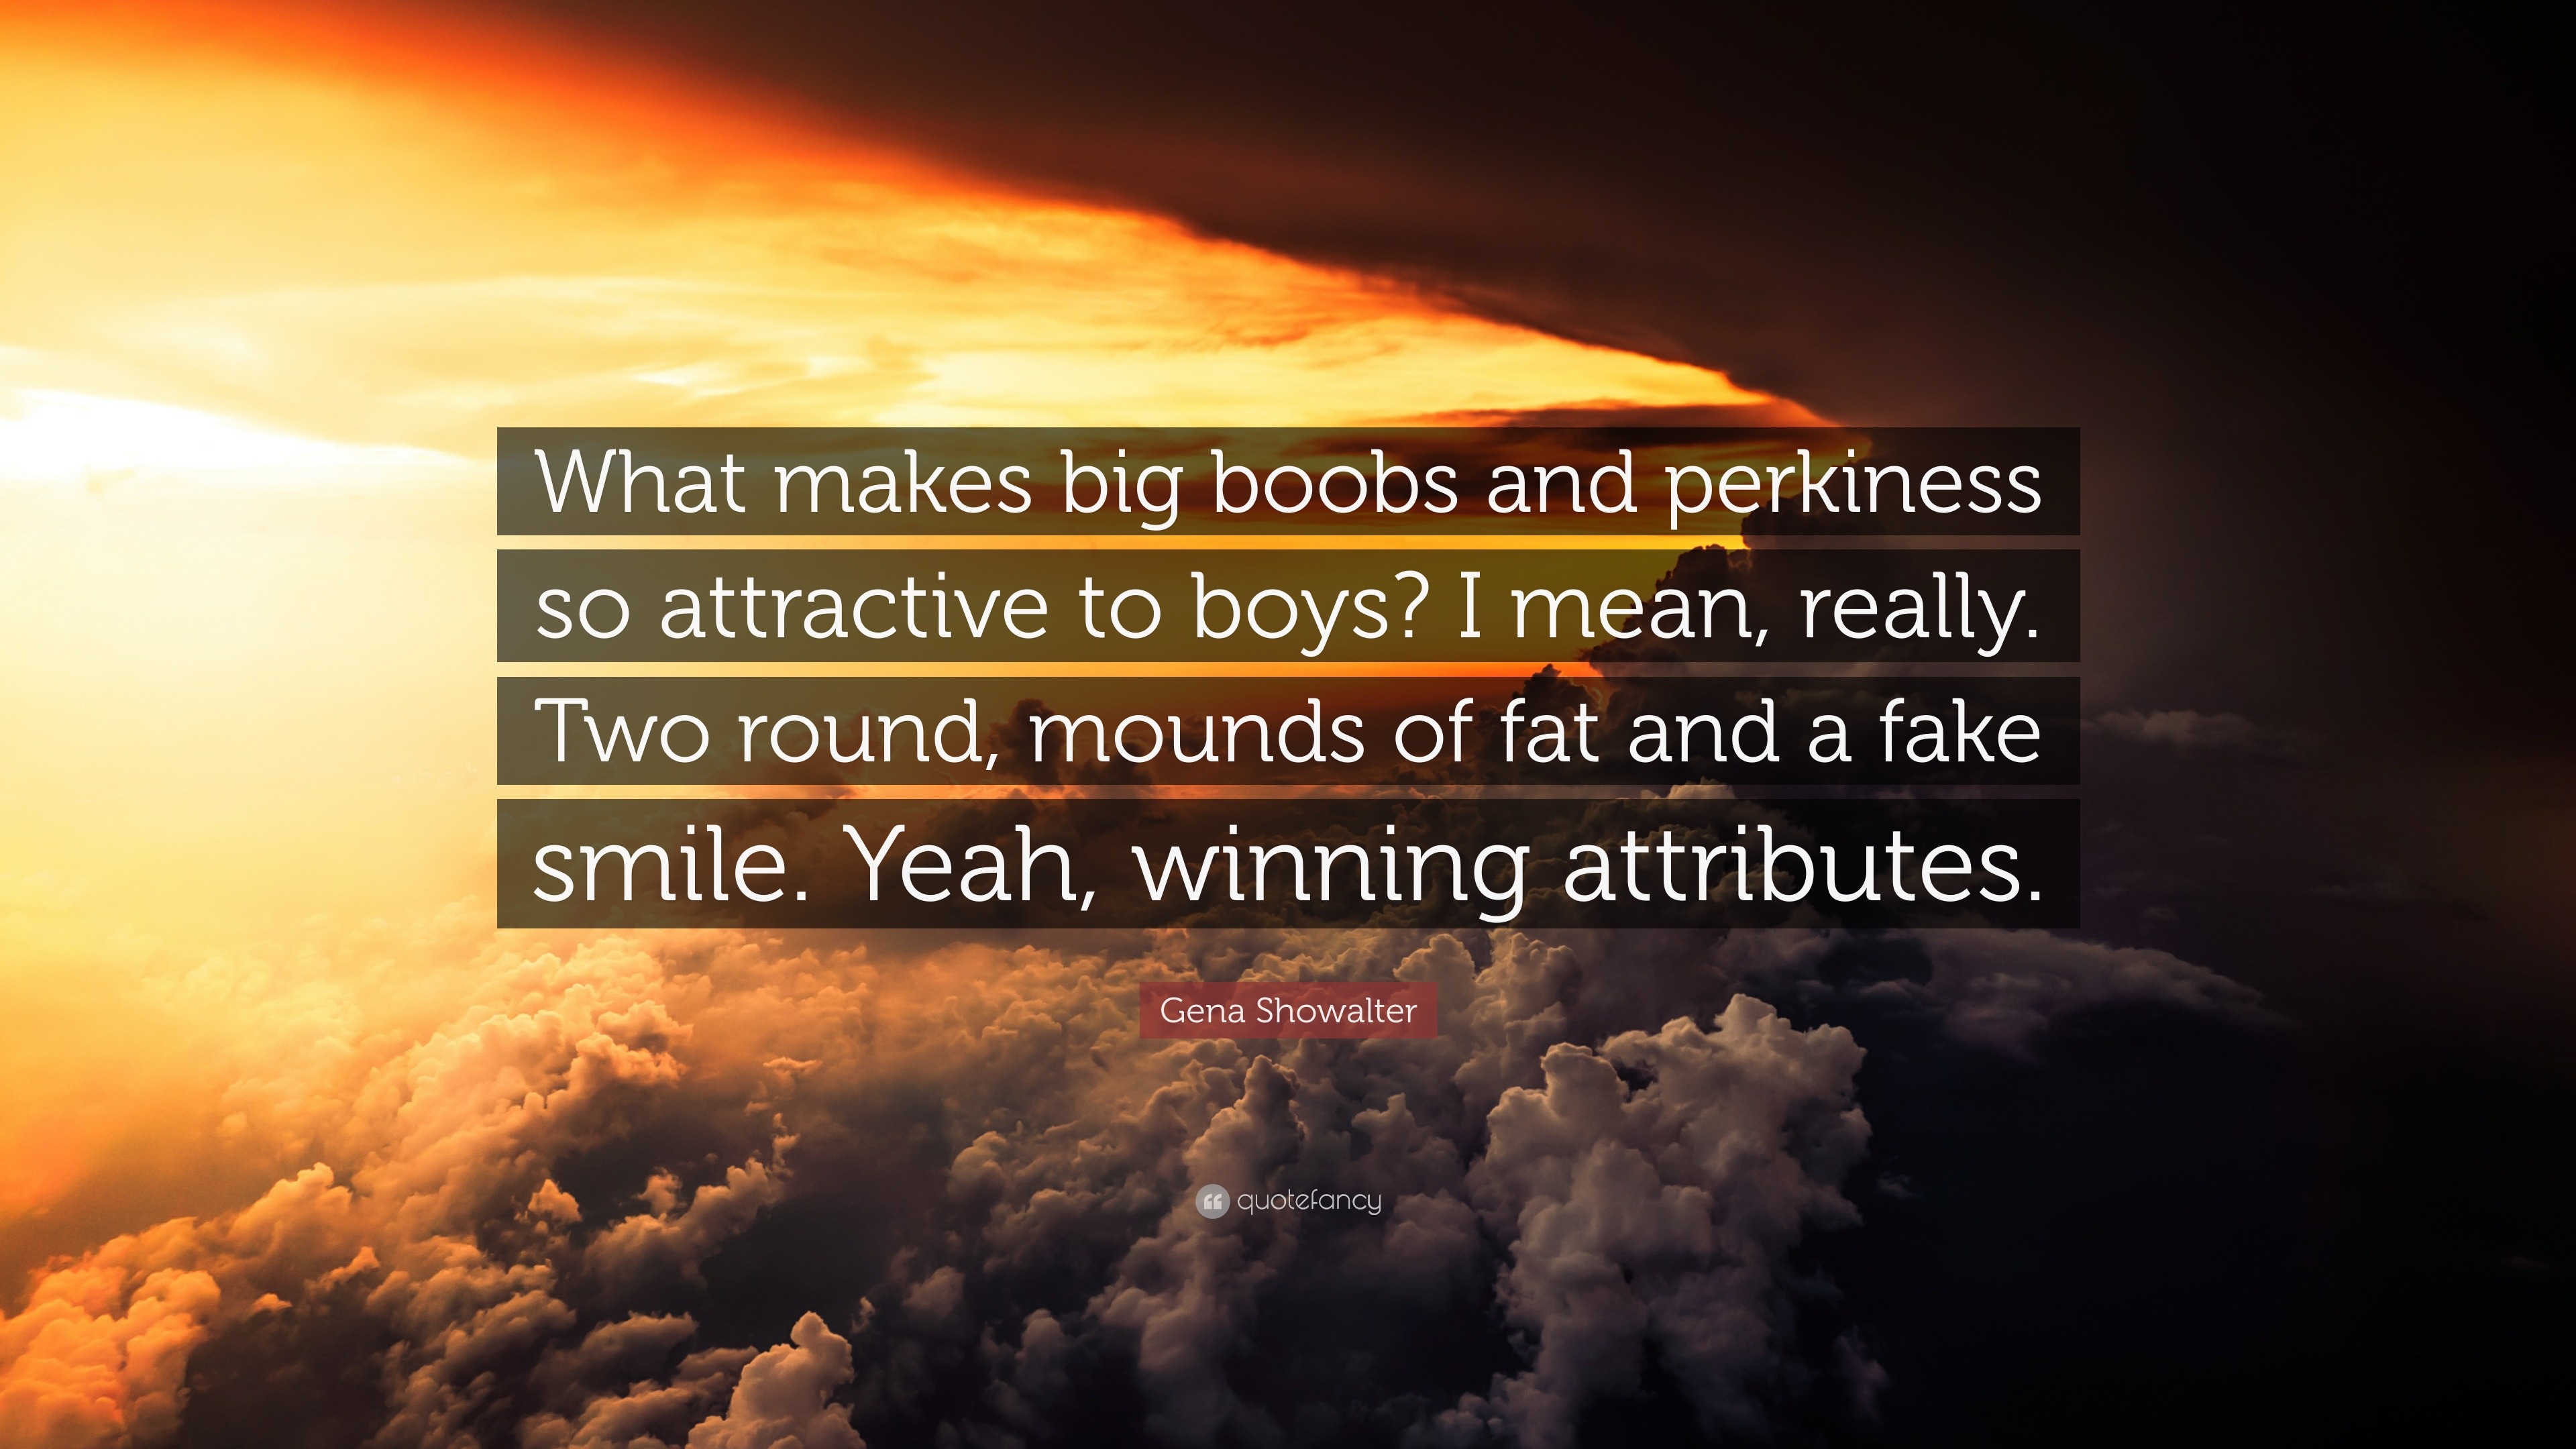 Gena Showalter quote: What makes big boobs and perkiness so